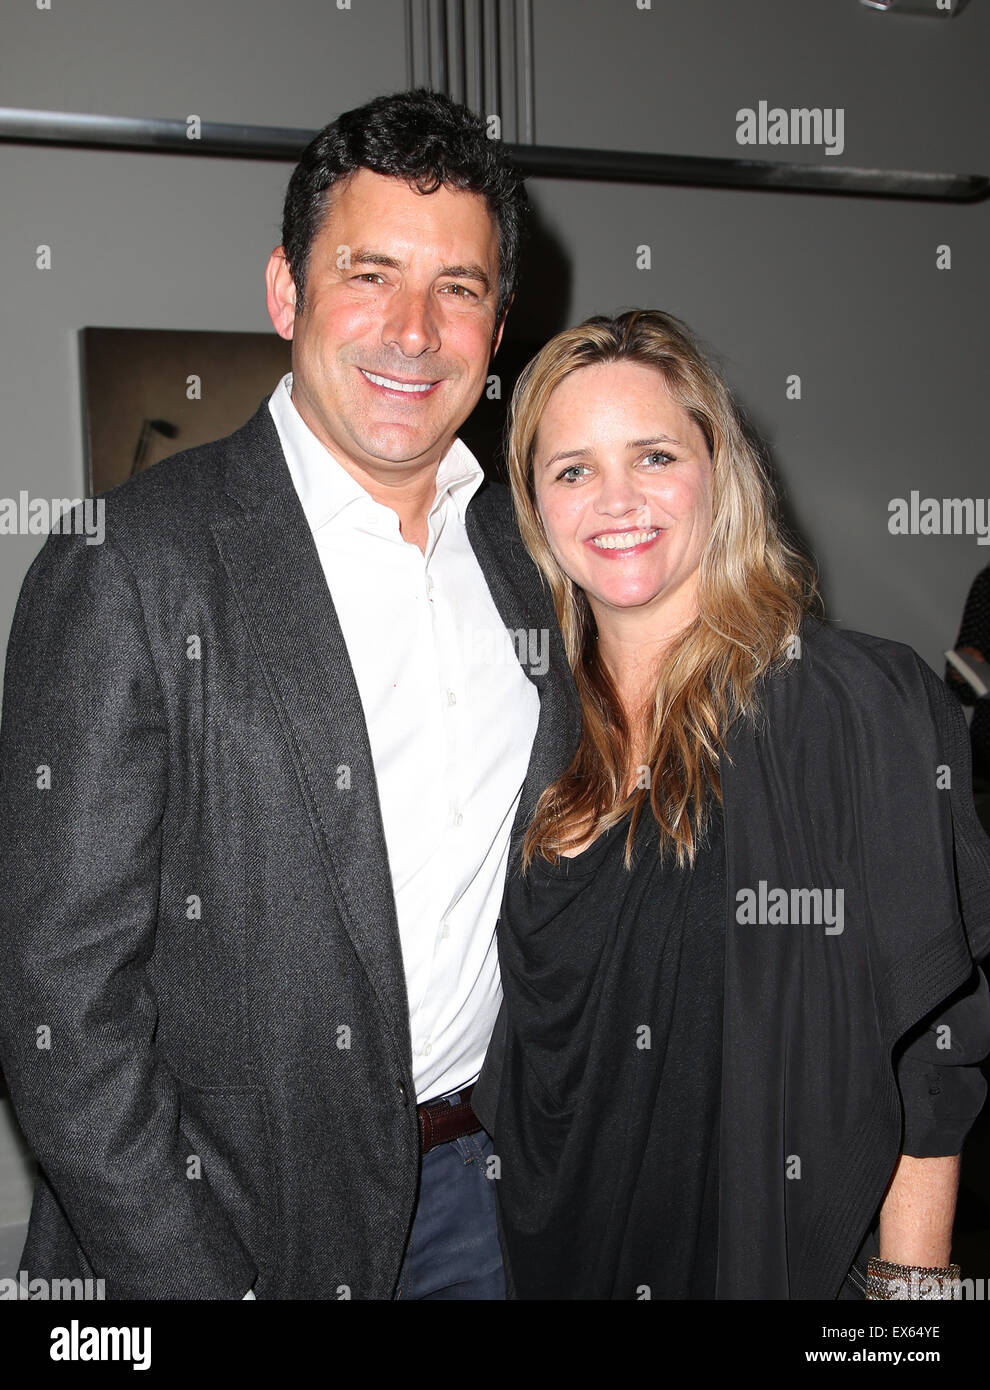 Ray Azoulay, John Carrabino and CAA Celebrates Maria Bello's new book, 'Whatever...Love is Love' at Obsolete  Featuring: Clare Munn, Guest Where: Culver City, California, United States When: 06 May 2015 C Stock Photo